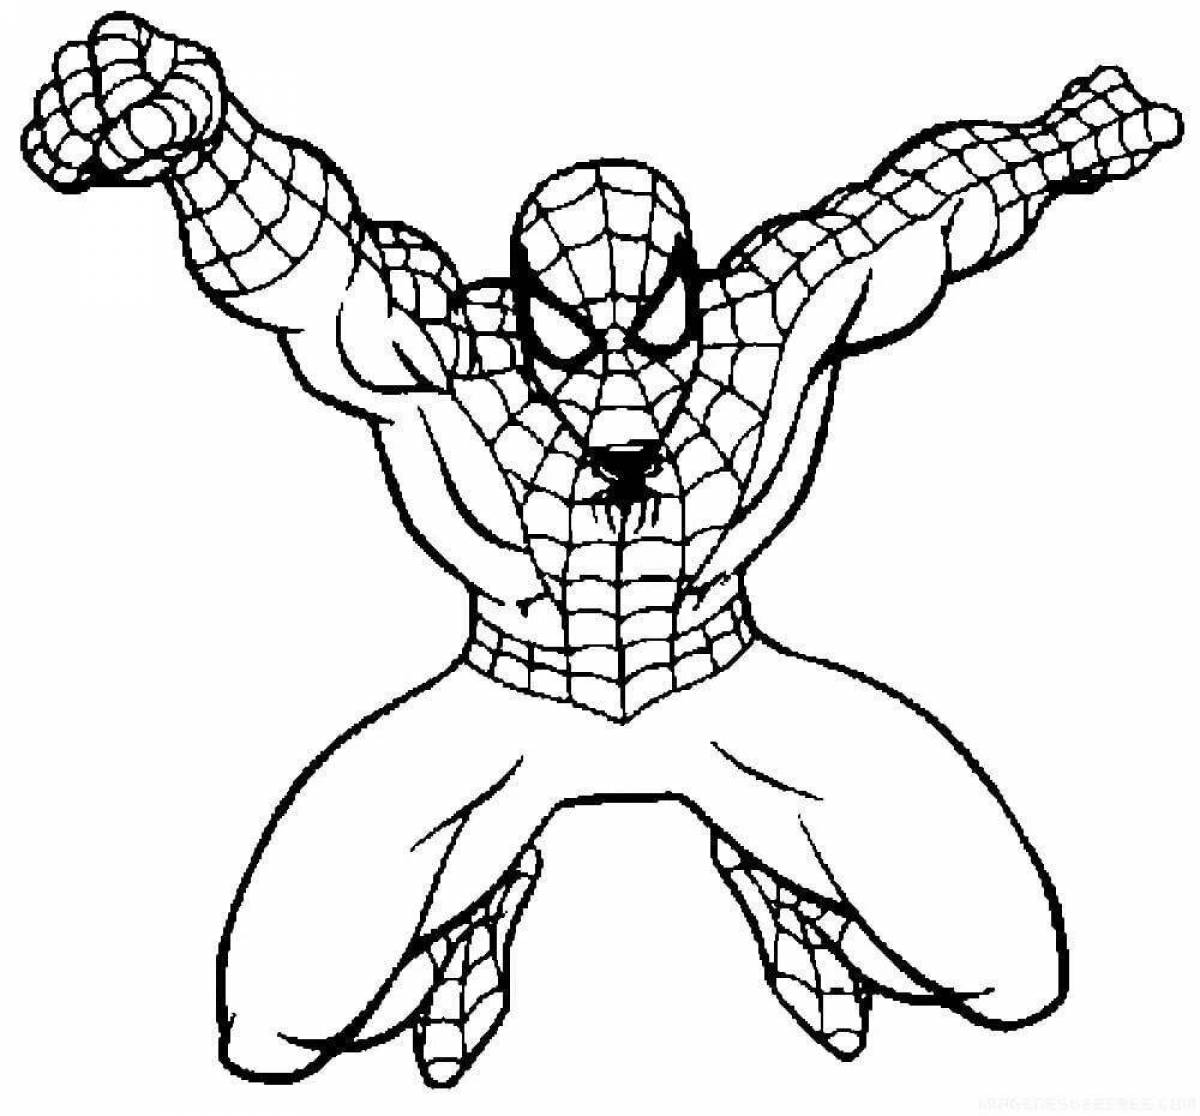 Spiderman ps4 intricate coloring book